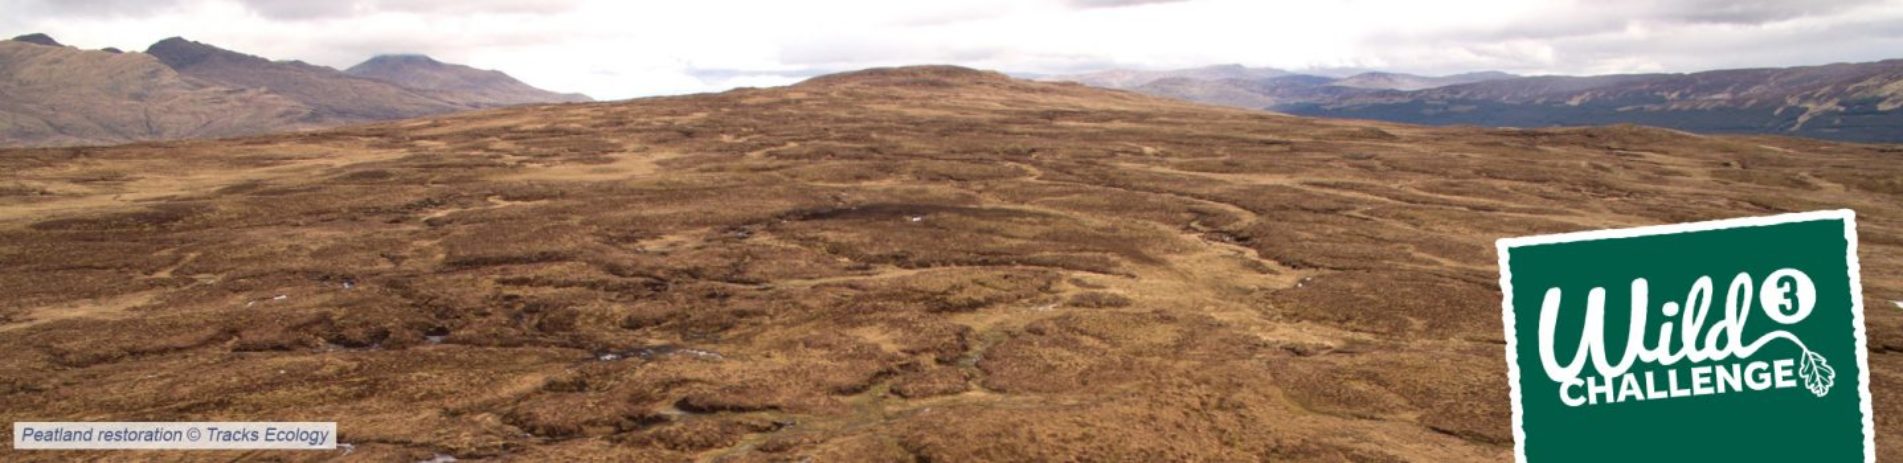 large-expanse-of-peatland-brown-hills-with-text-in-corner-reading-wild-challenge-three